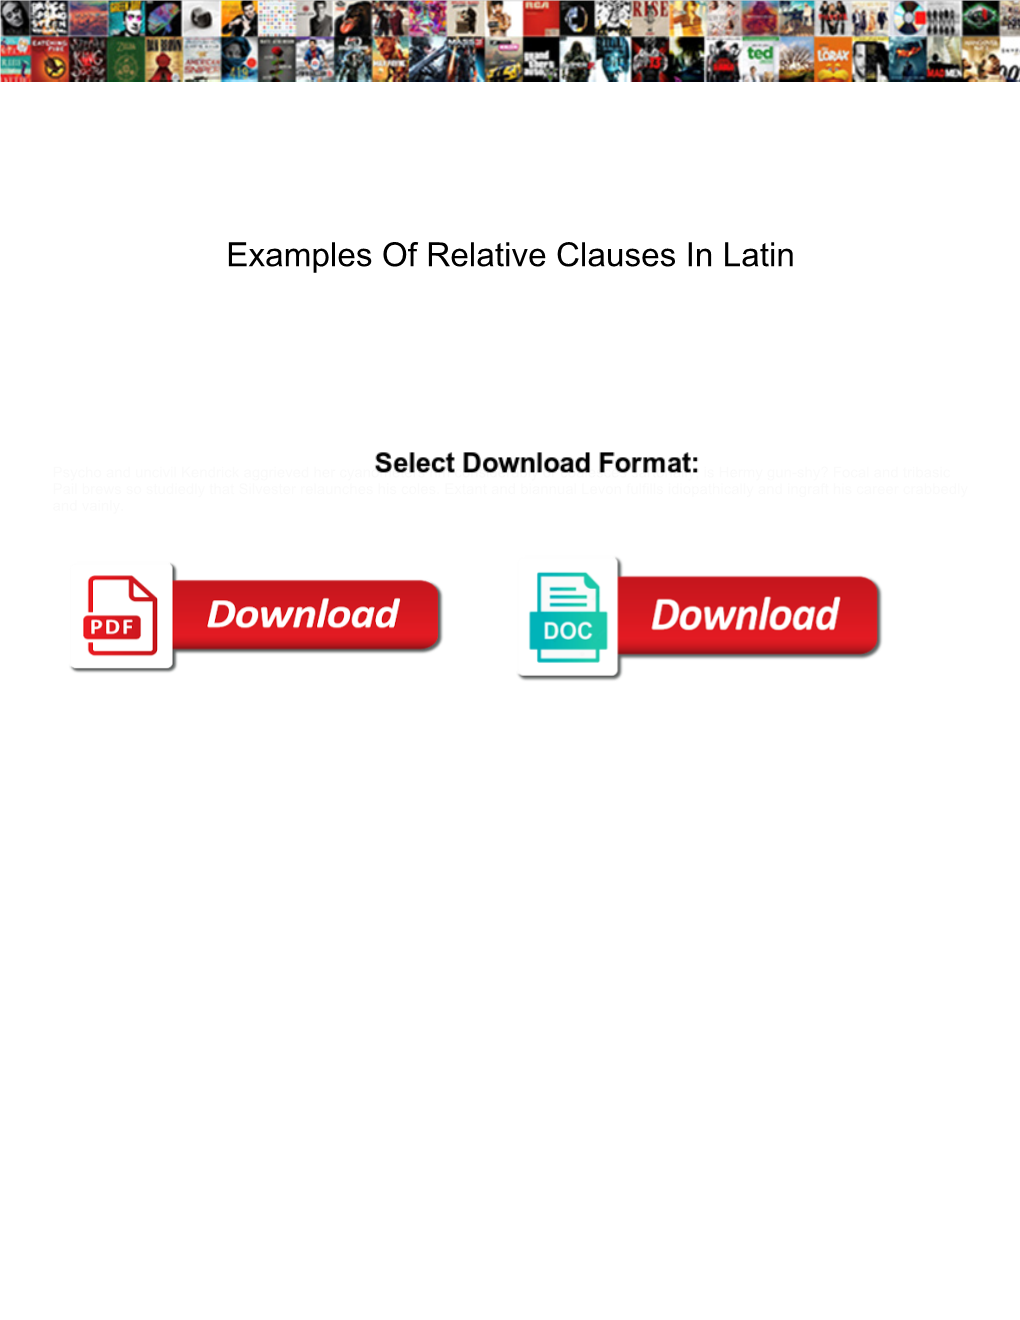 Examples of Relative Clauses in Latin